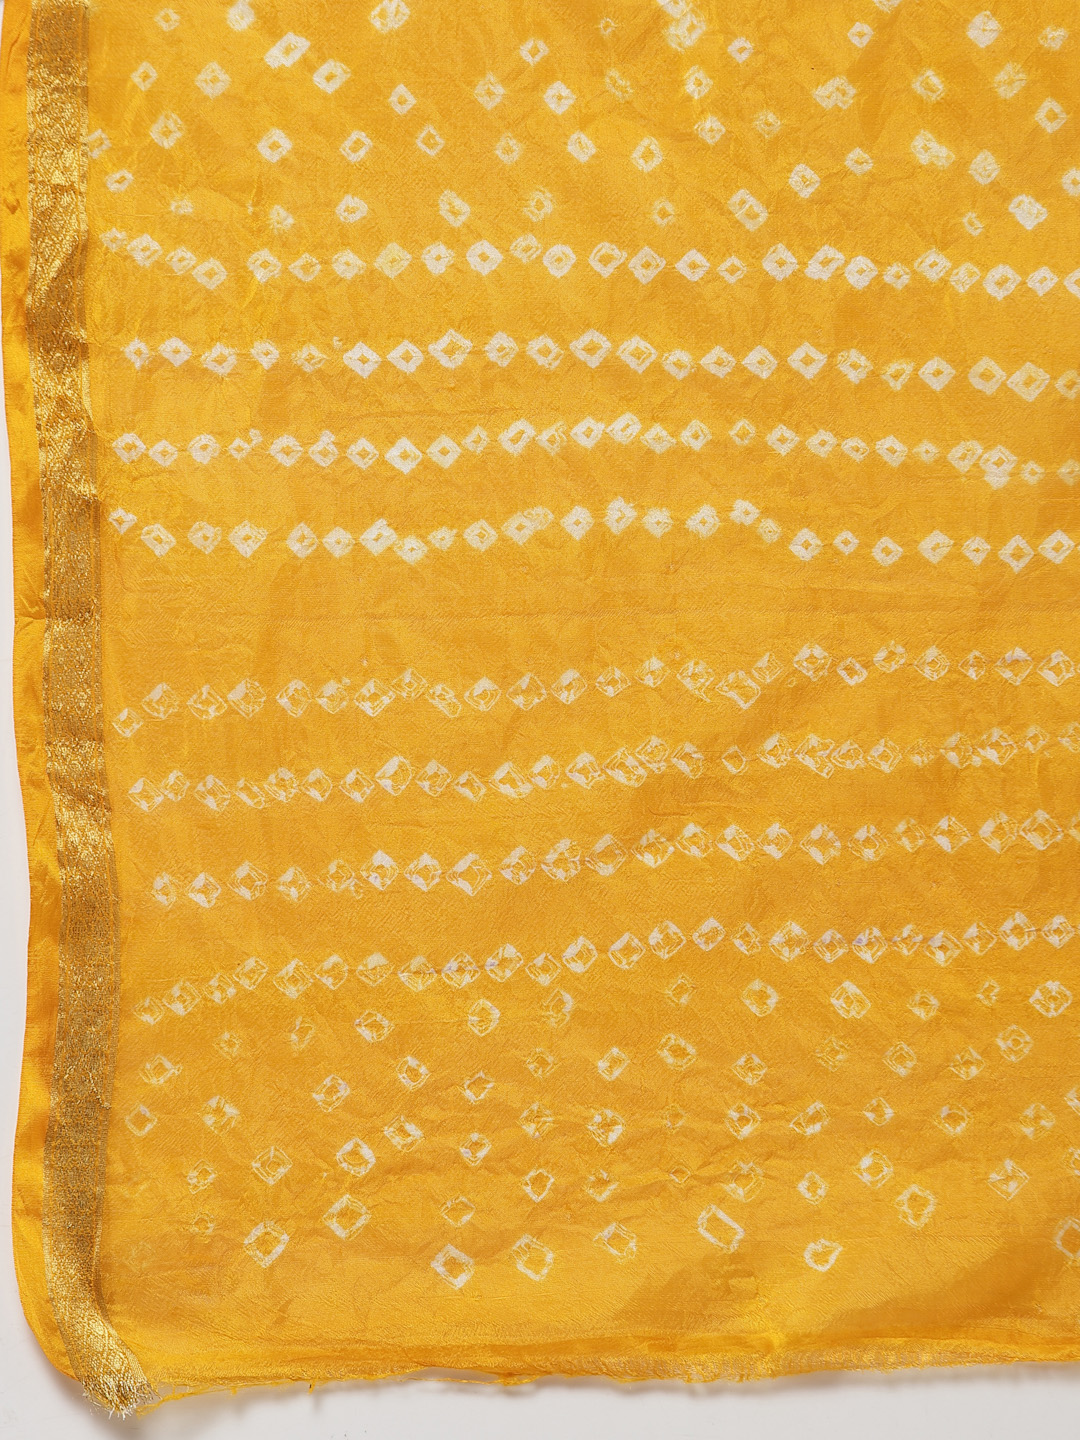 Women Silk Bandhani and Zari Weaving Saree with Unstitched Blouse - Yellow